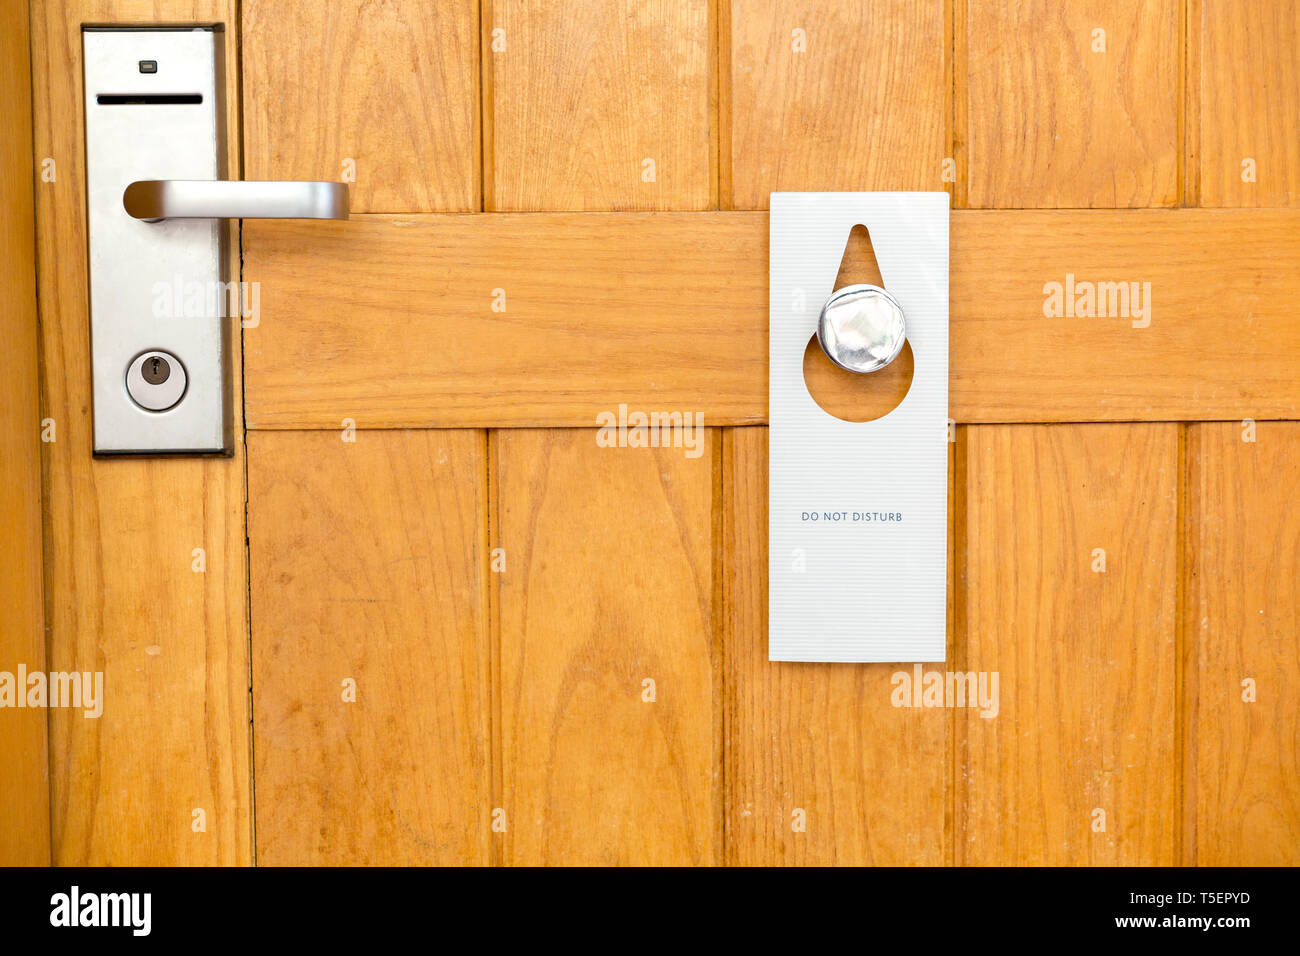 please do not disturb sign on Closed wooden door of hotel room. Stock Photo